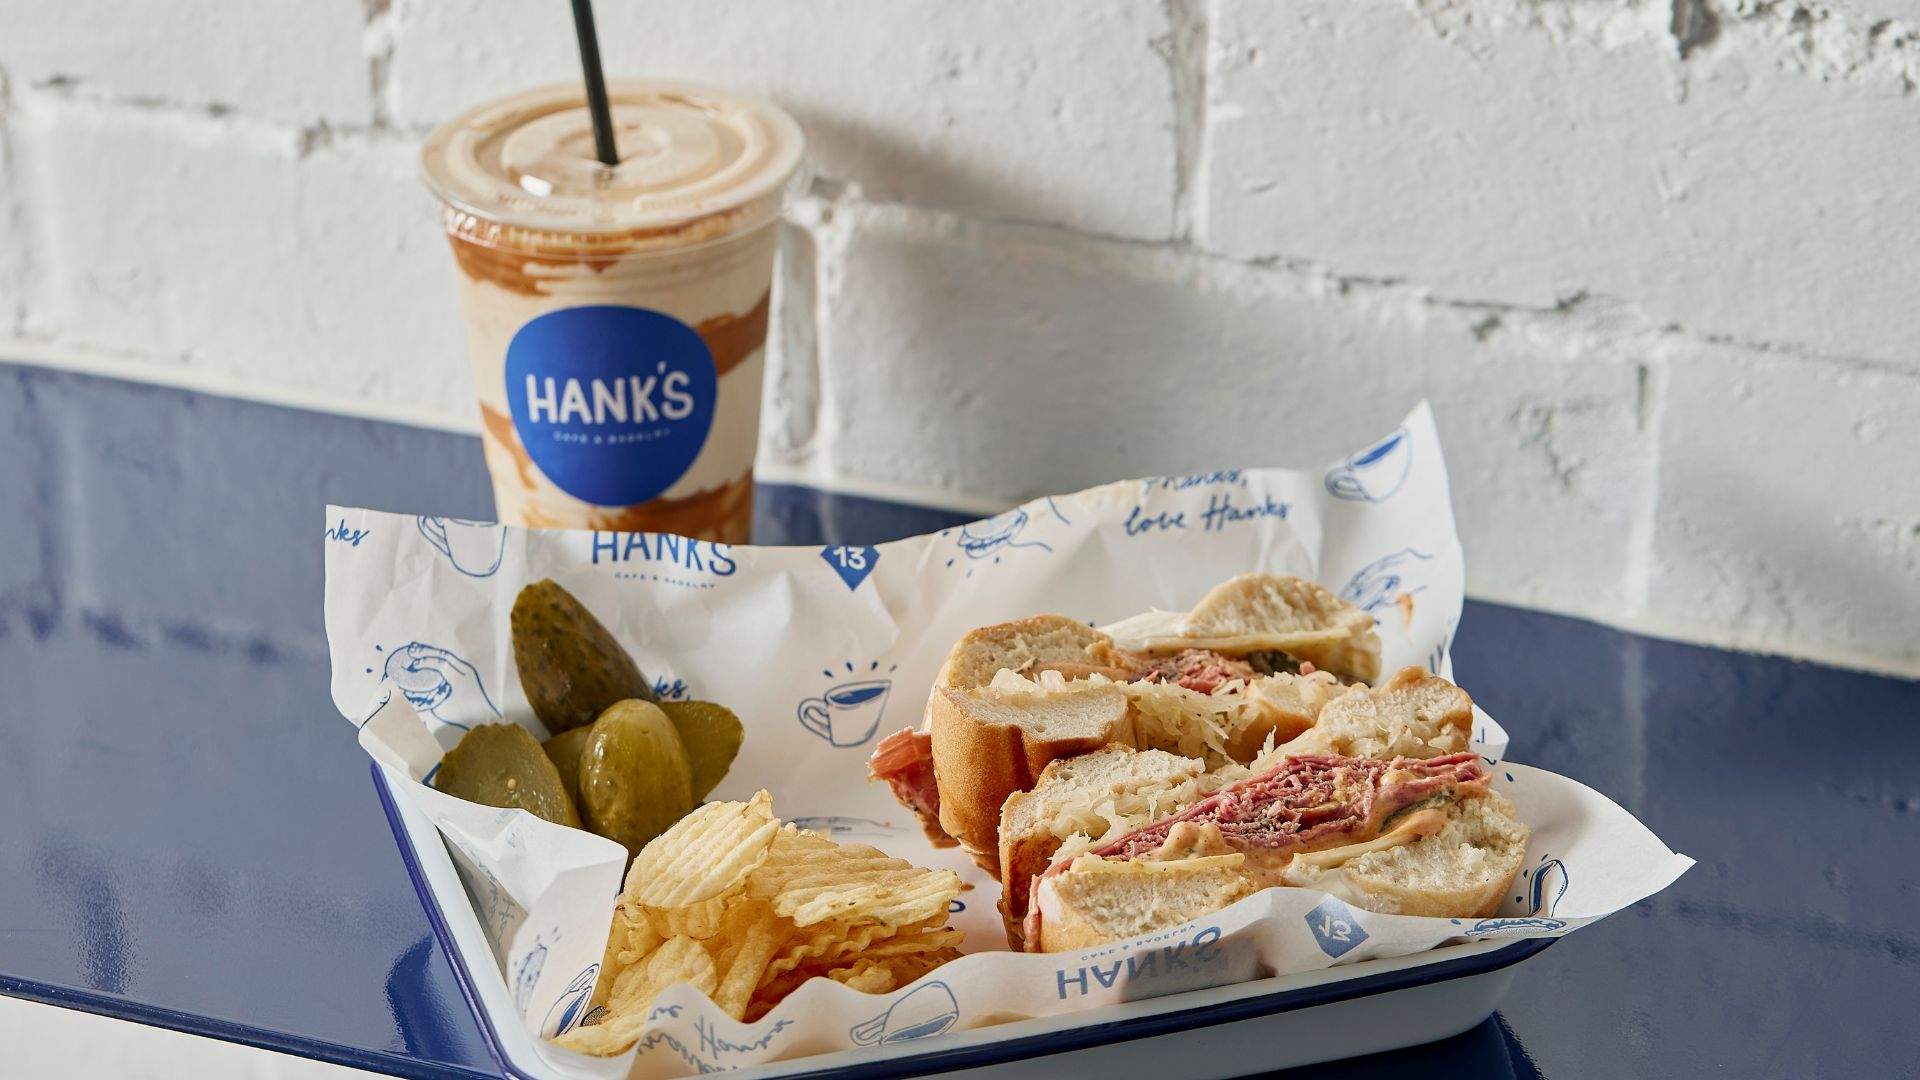 hank's cafe and bagelry - melbourne bagel shop -armadale